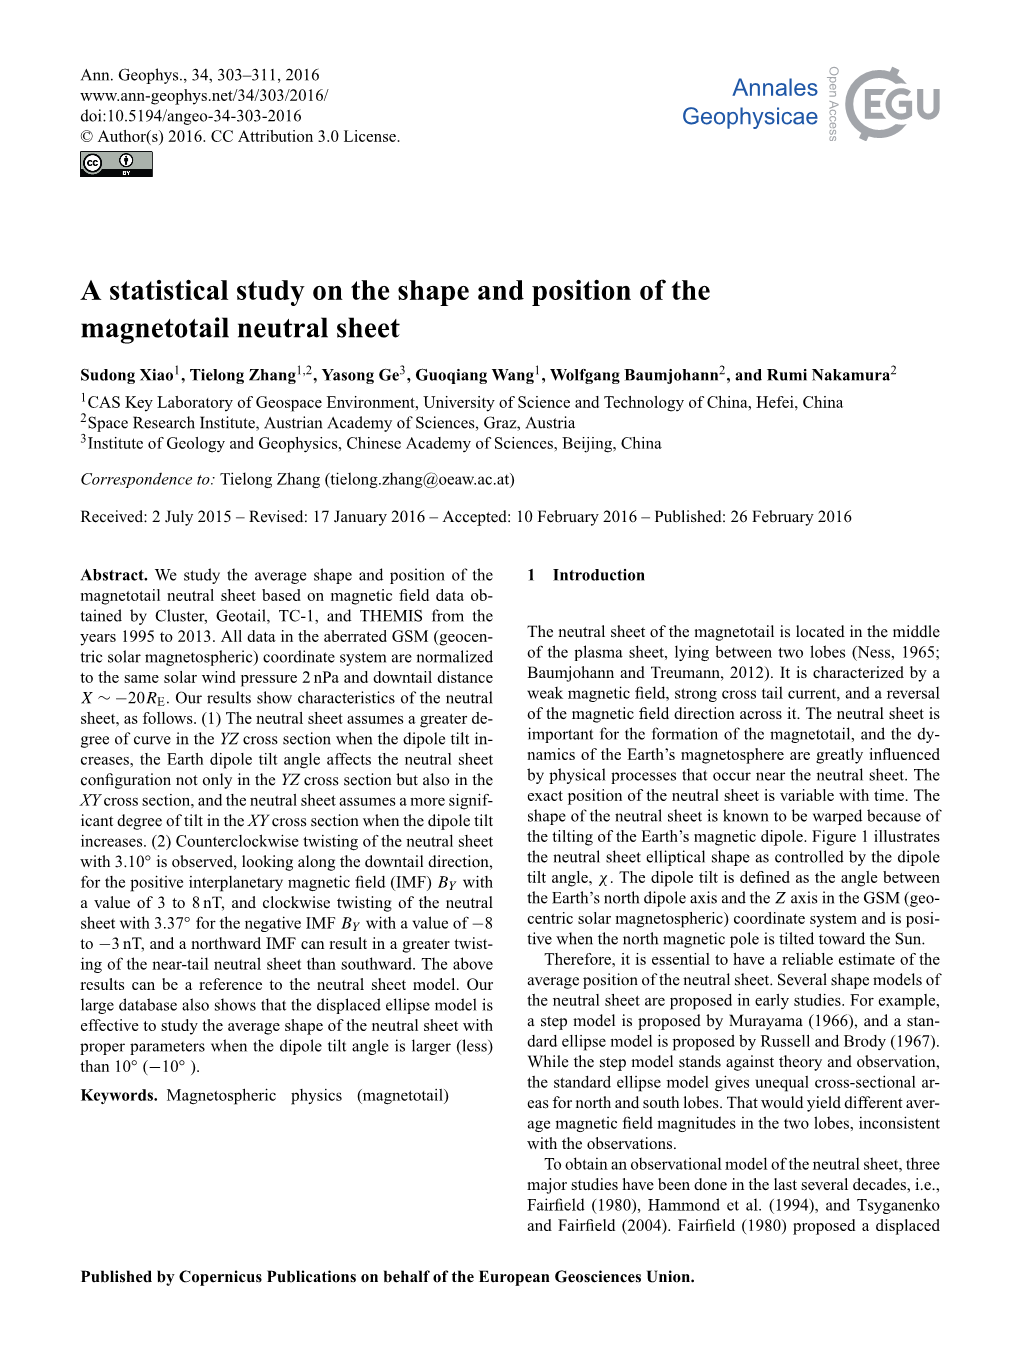 A Statistical Study on the Shape and Position of the Magnetotail Neutral Sheet